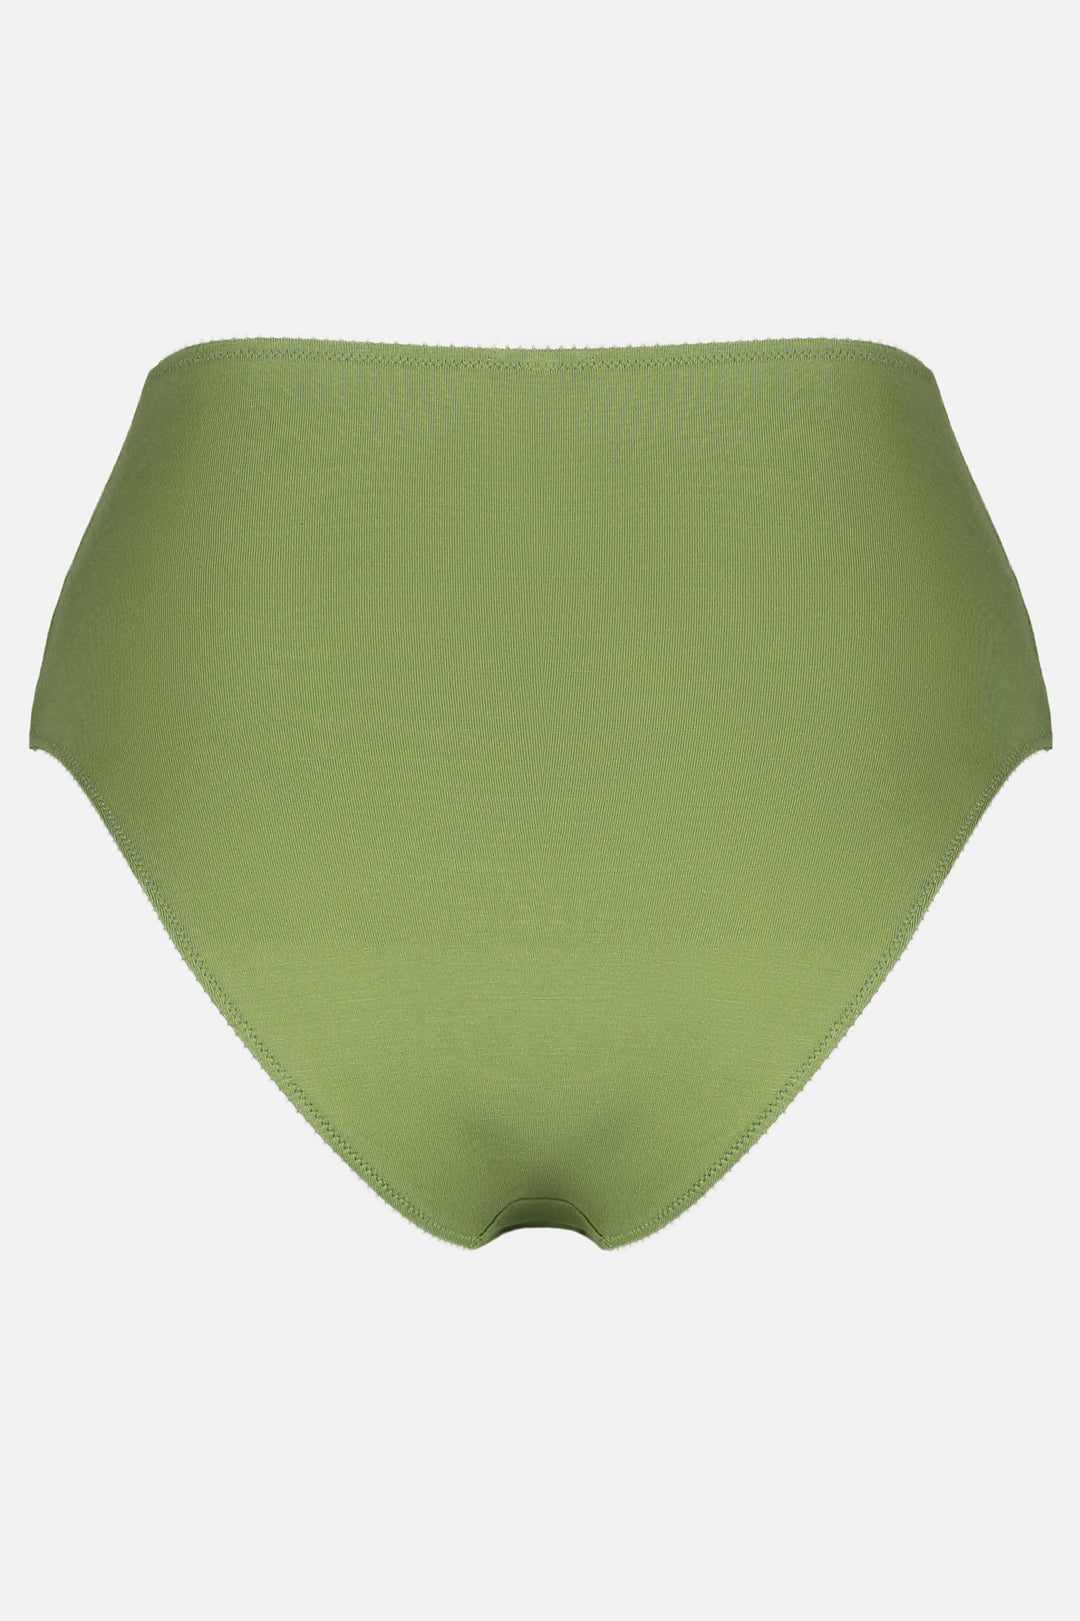 Videris Lingerie high waist knicker in olive TENCEL™  with cheeky bottom coverage